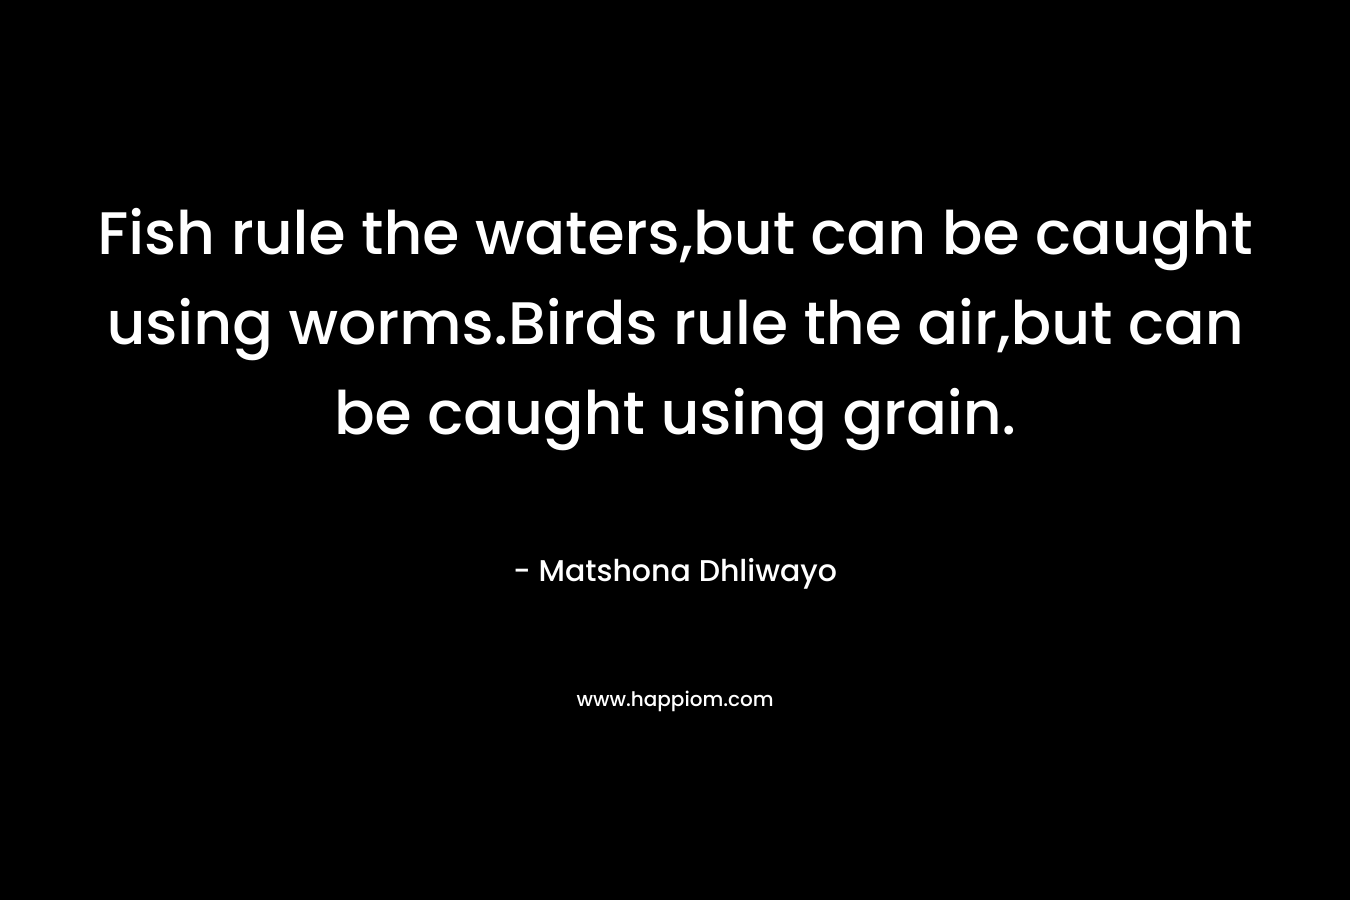 Fish rule the waters,but can be caught using worms.Birds rule the air,but can be caught using grain.